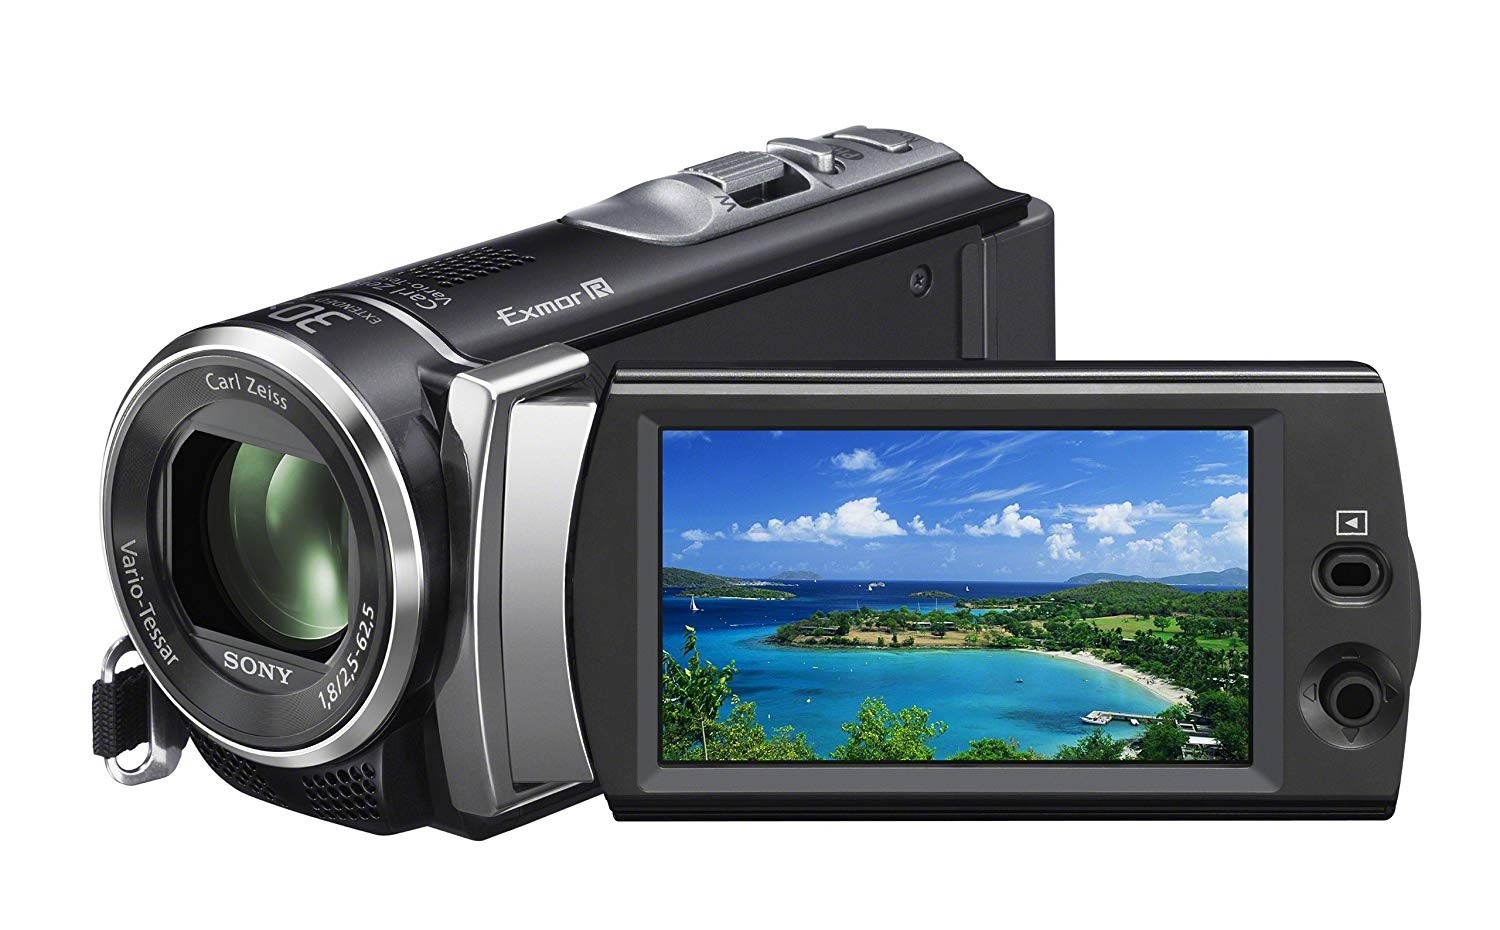 Sony HDR-CX190 High Definition Handycam 5.3 MP Camcorder